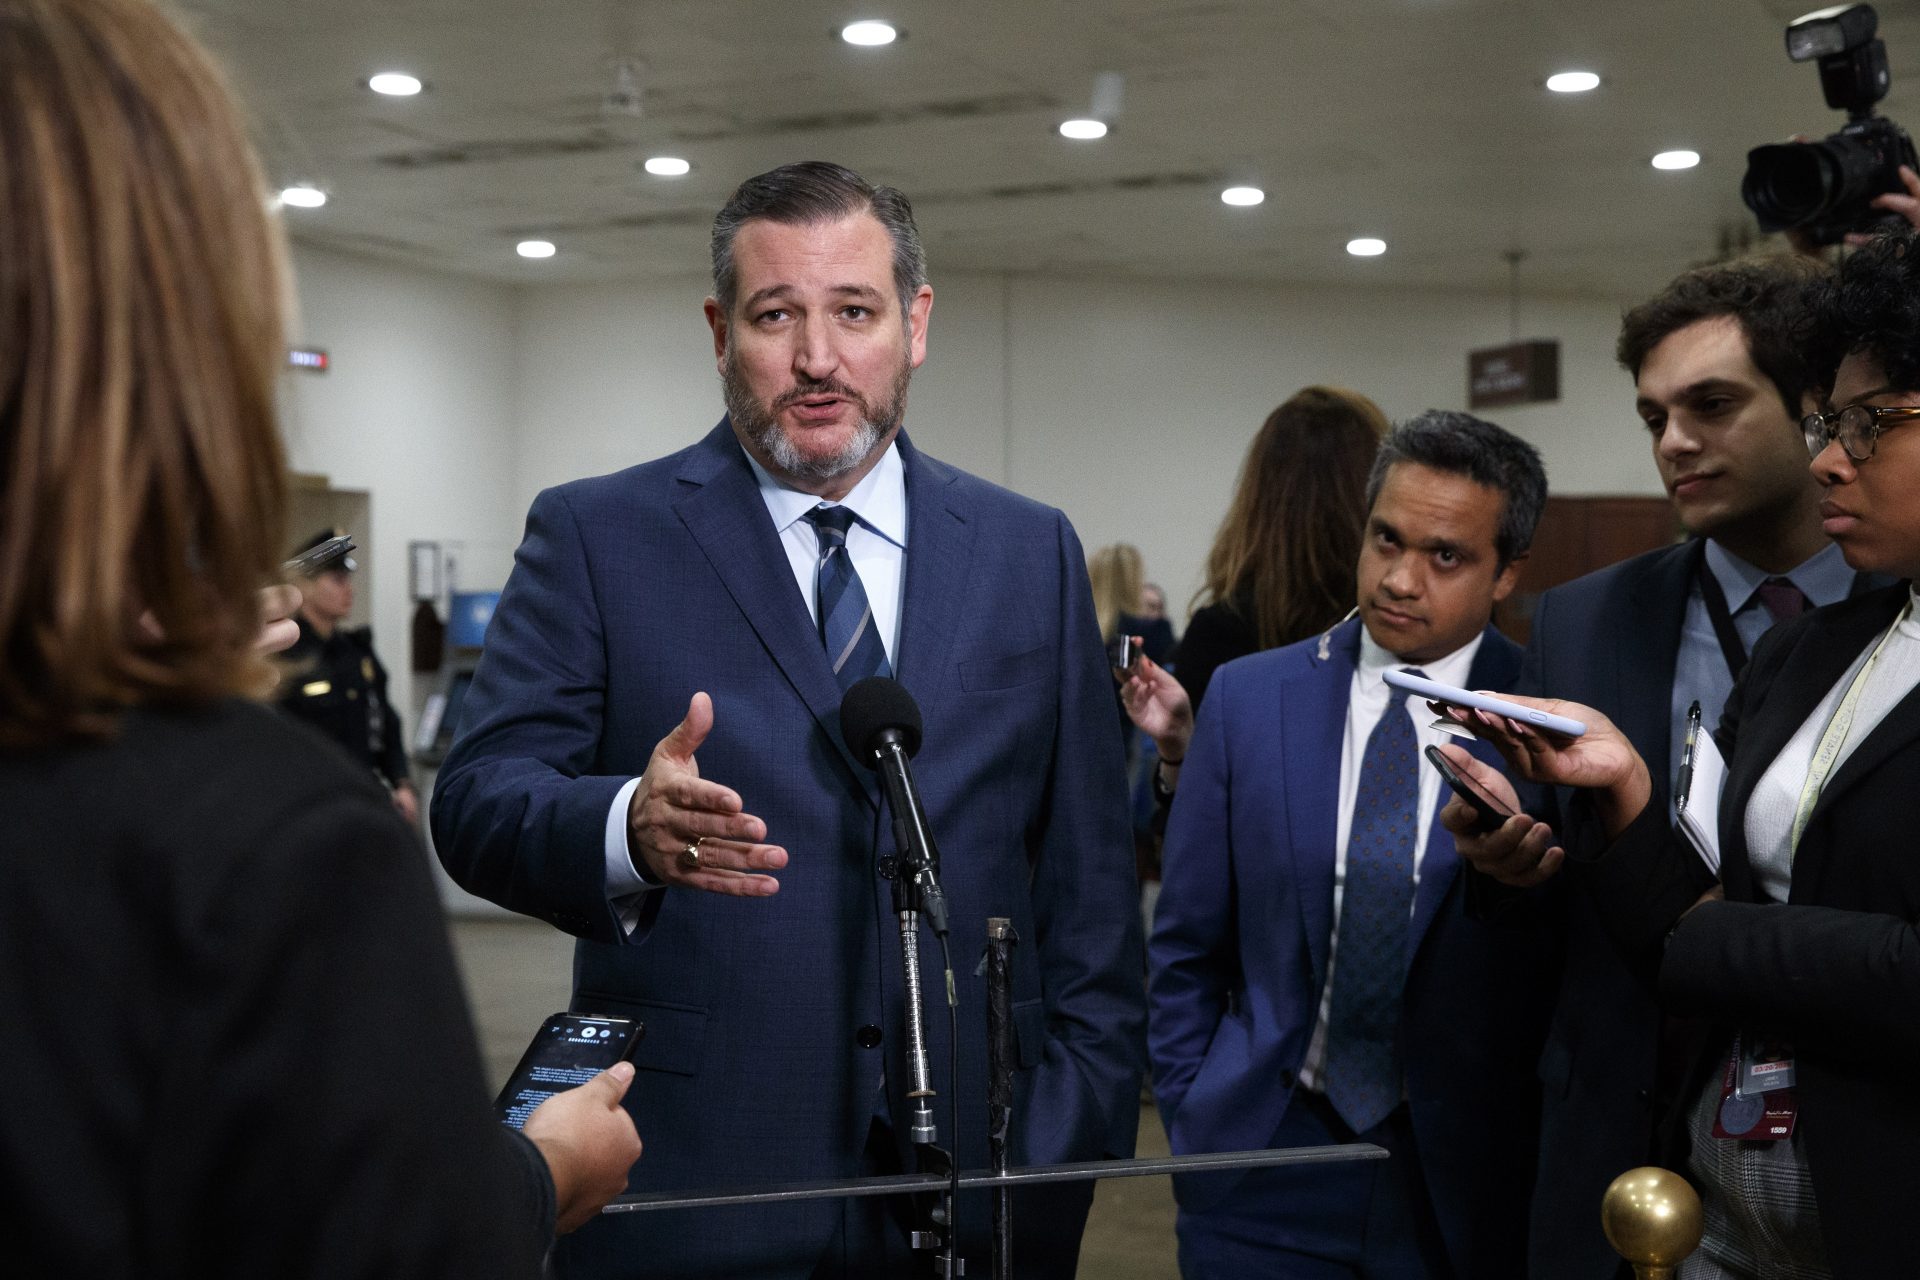 Sen. Ted Cruz, R-Texas, speaks to the media during a break in the impeachment trial of President Donald Trump on charges of abuse of power and obstruction of Congress, Thursday, Jan. 23, 2020, on Capitol Hill in Washington.